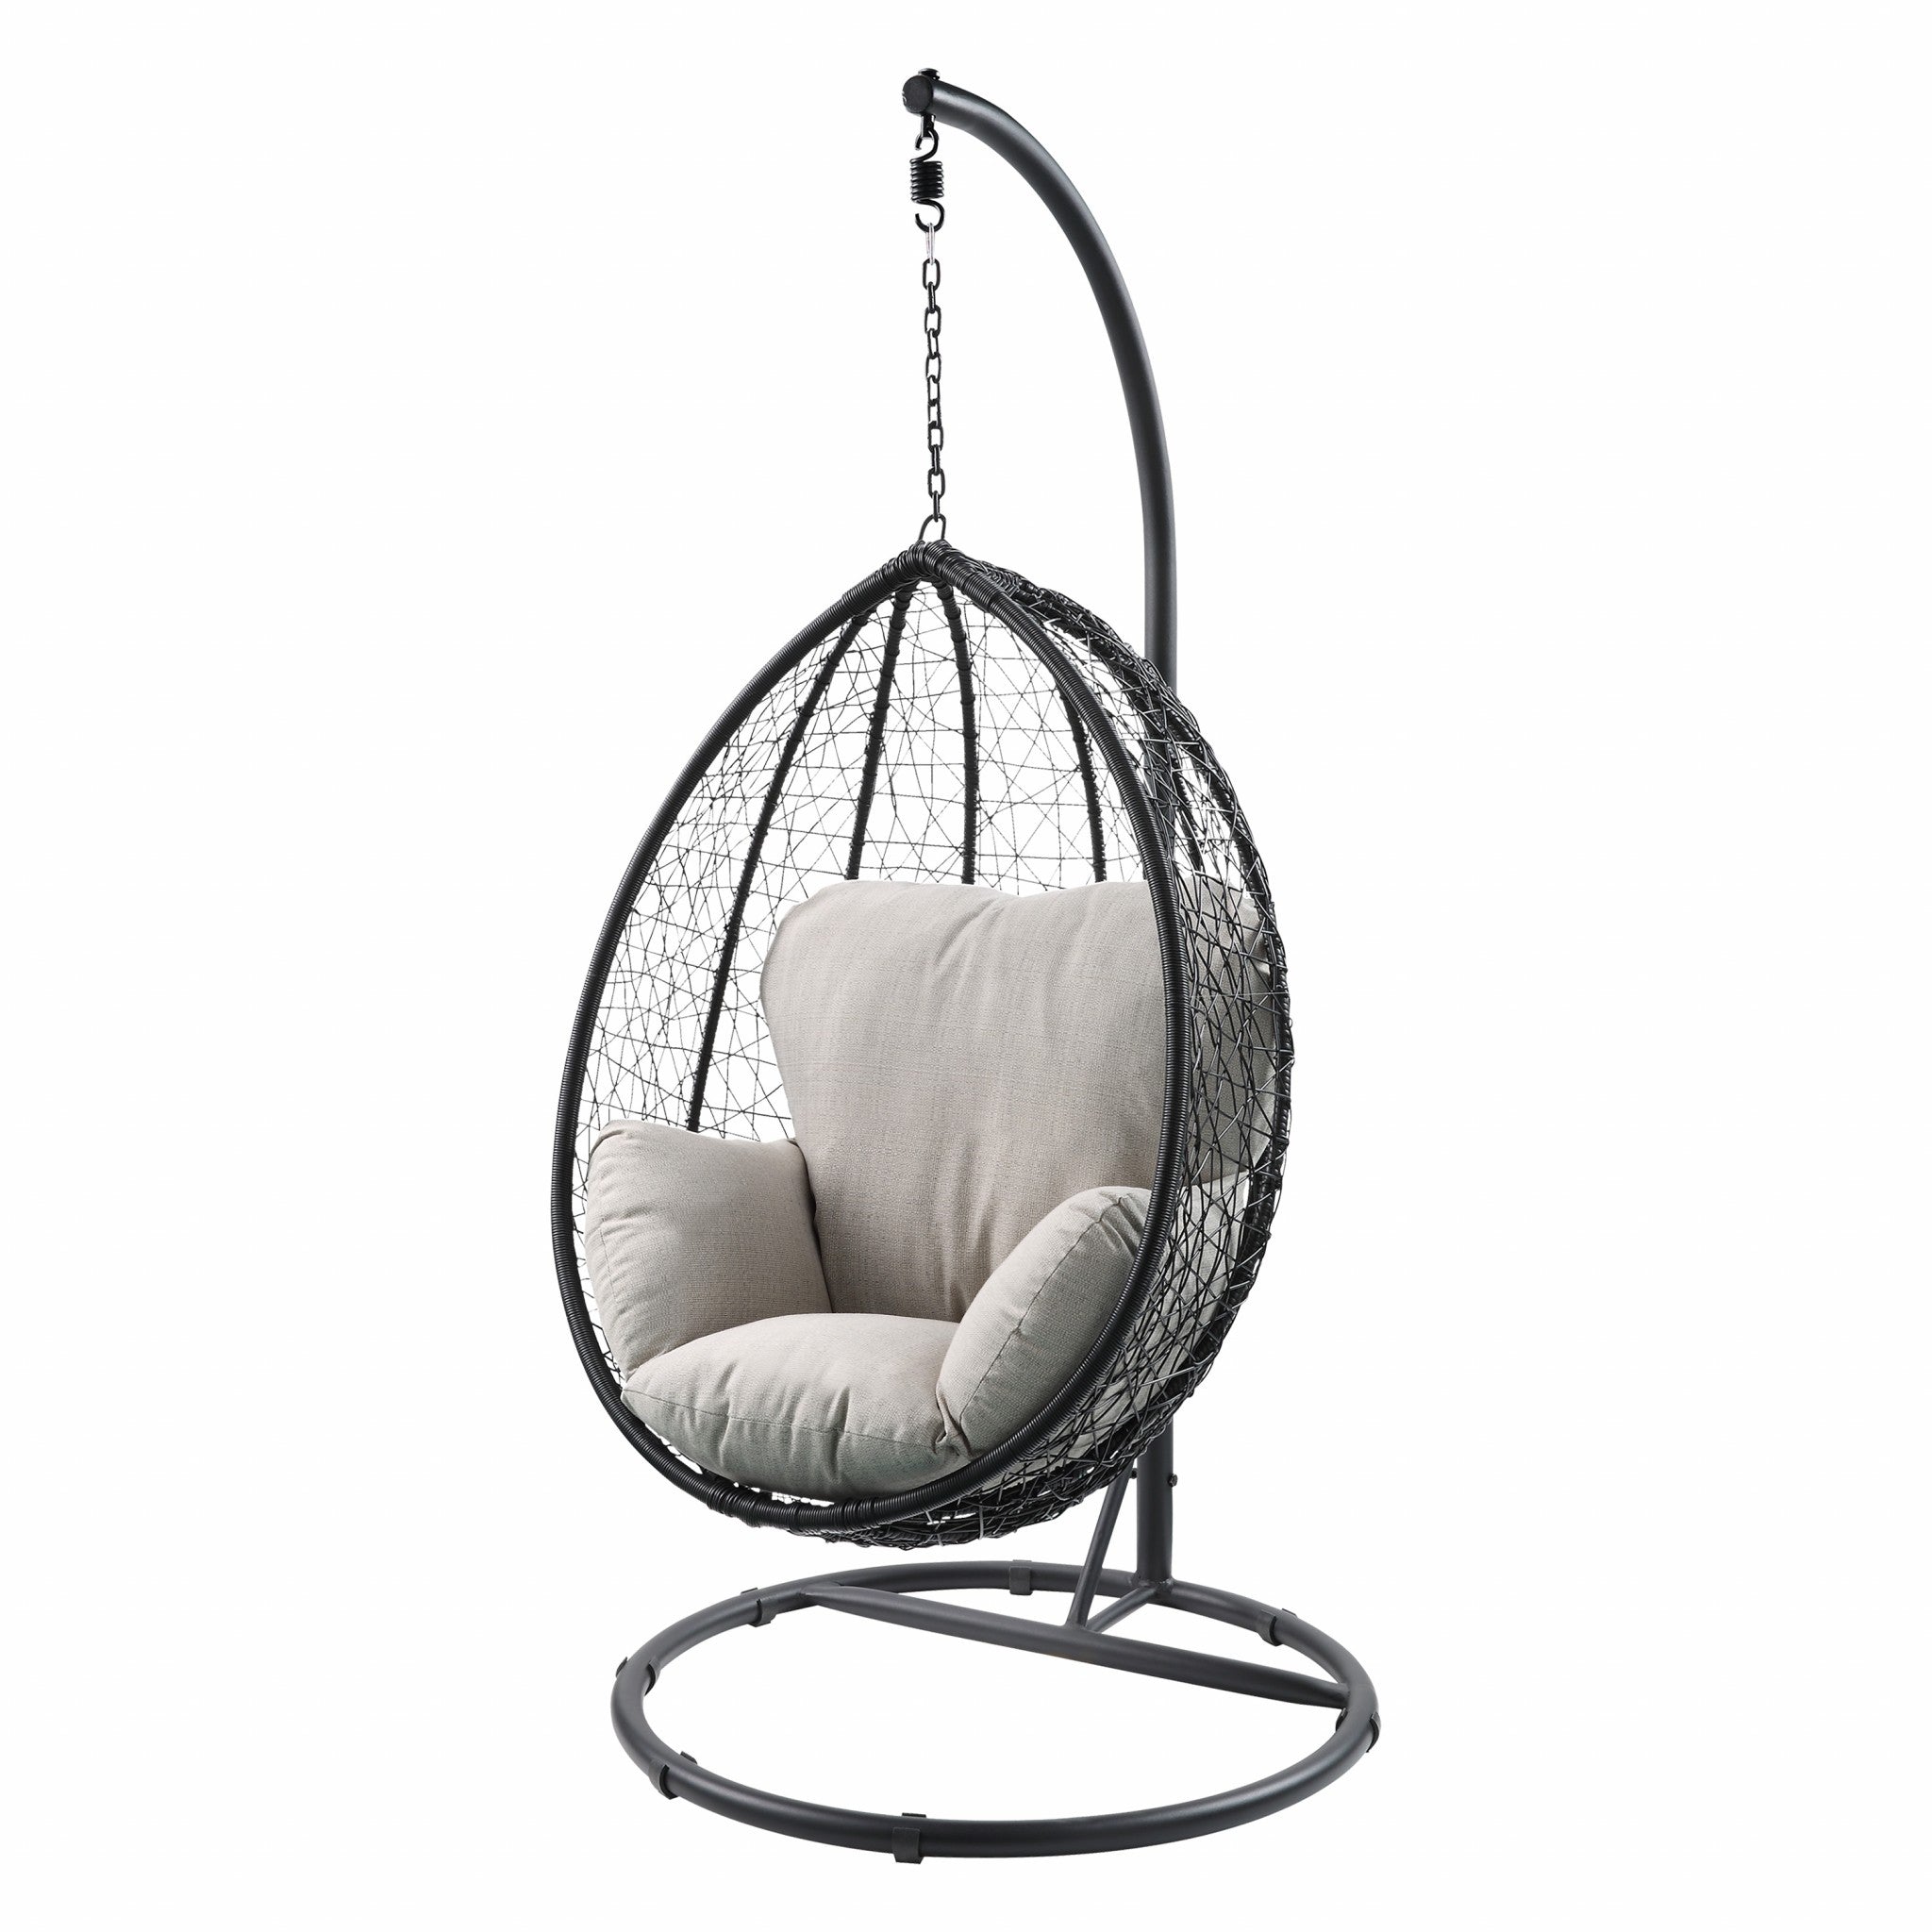 38" Black Metal Swing Chair With Beige Cushion - Tuesday Morning-Outdoor Chairs